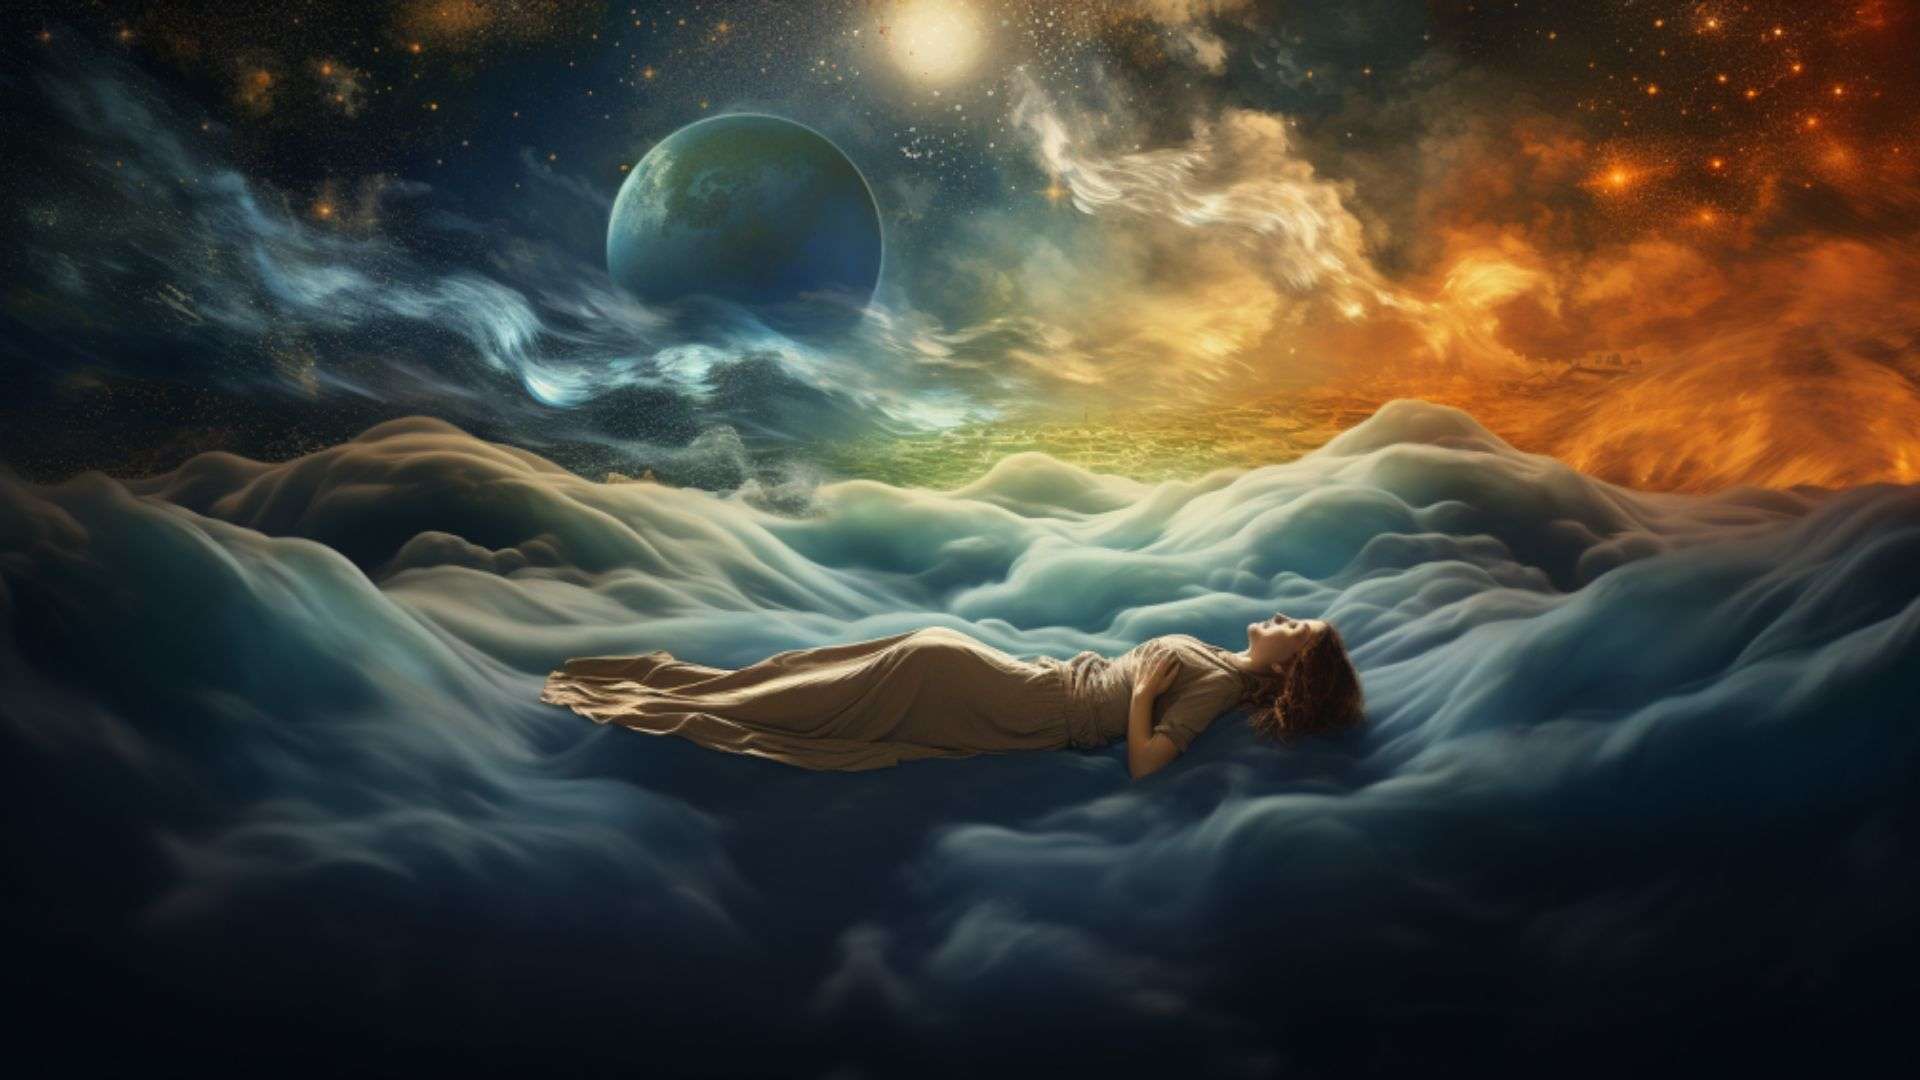 An evocative representation of the ongoing exploration into the potential benefits and risks of lucid dreaming, emphasizing the quest for understanding and truth and are lucid dreams bad for your health.